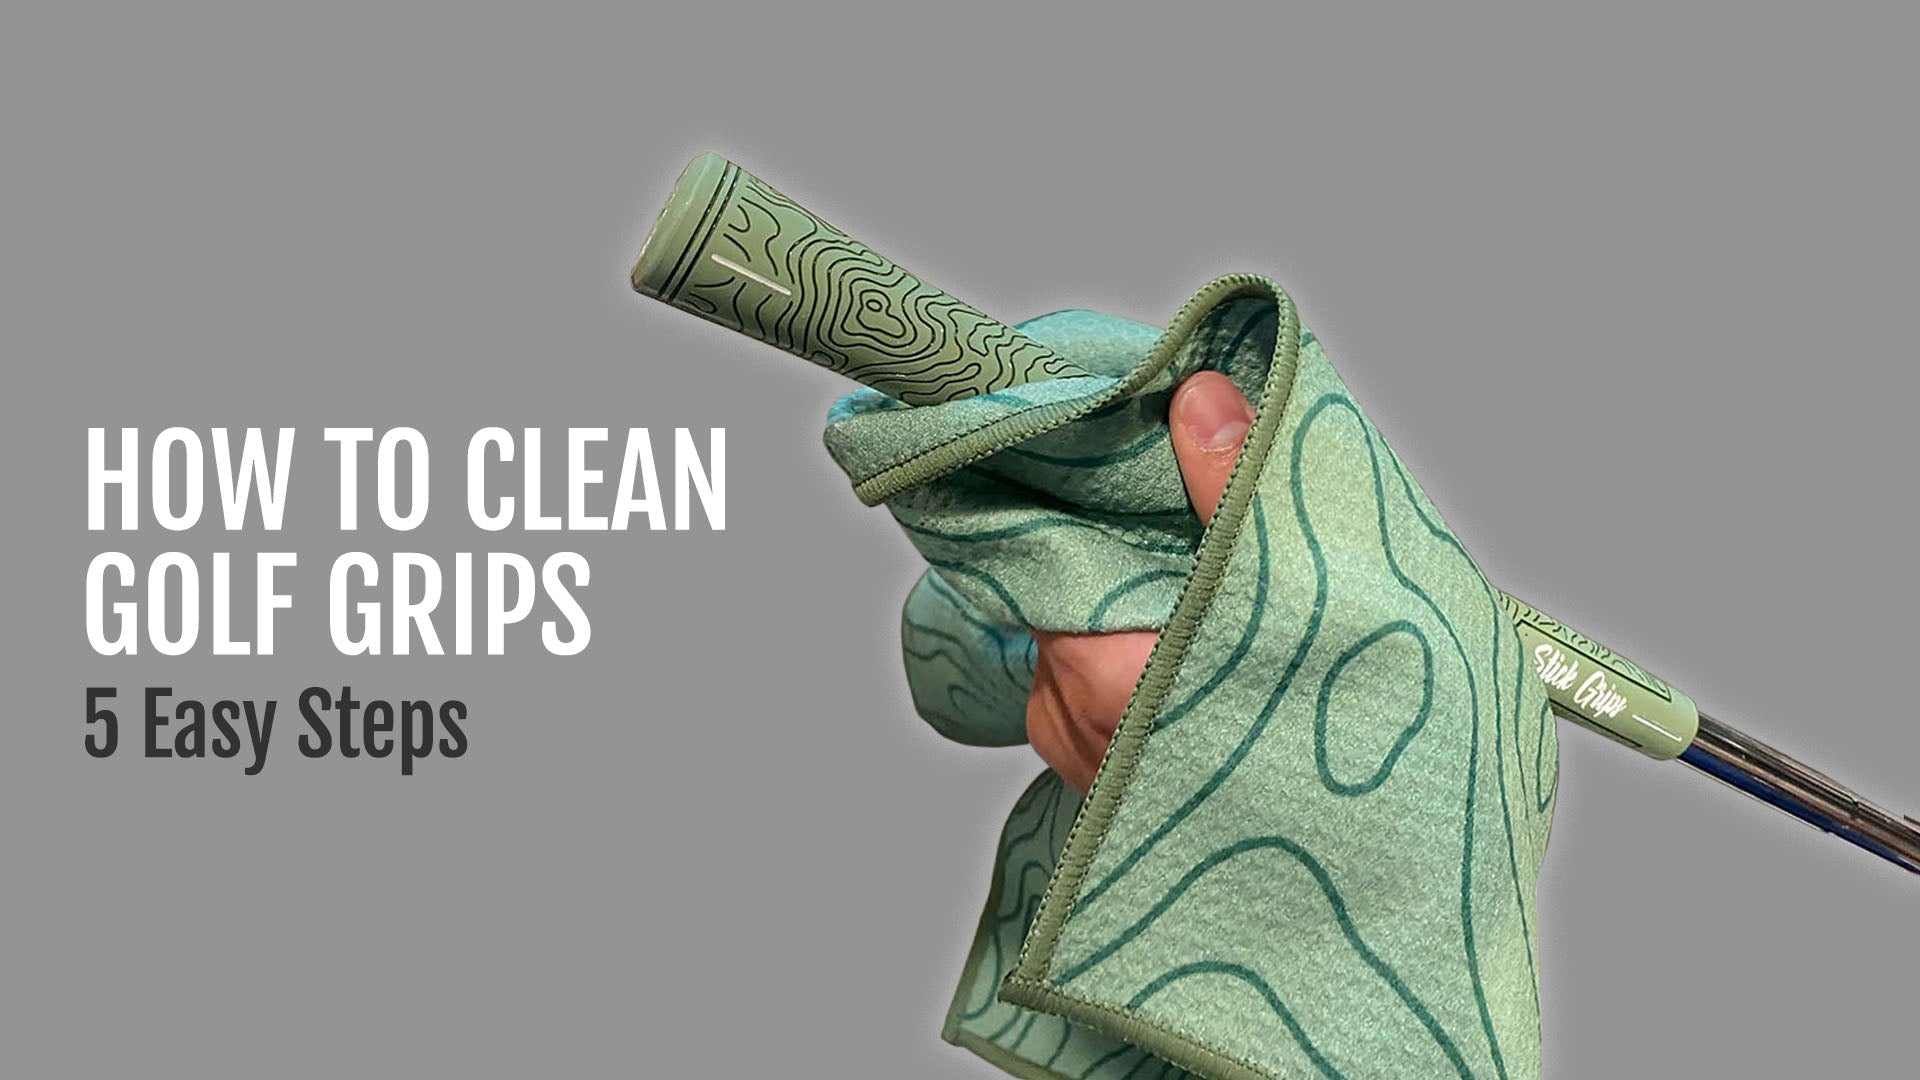 How to Clean Golf Grips